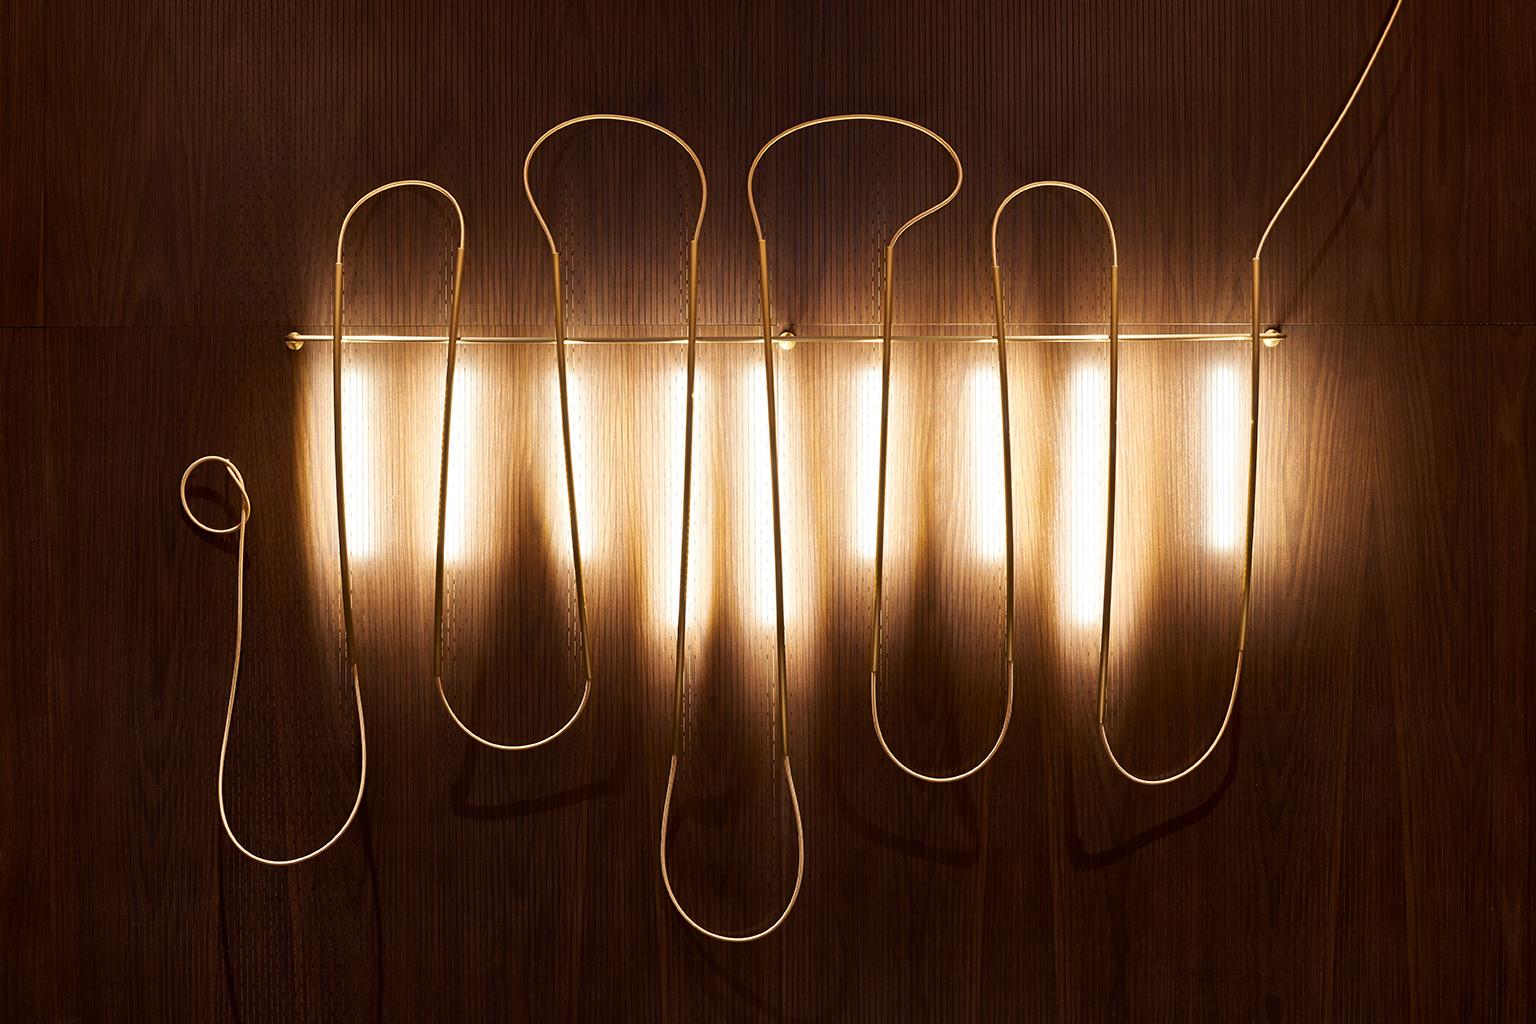 The line drawn lamp is a series of brass tubes, curved and slotted, and connected by a cloth cord. The slots hold LED's that shine back against the wall. Each bar can be adjusted, to change the density of light and shadow along the wall. As they are